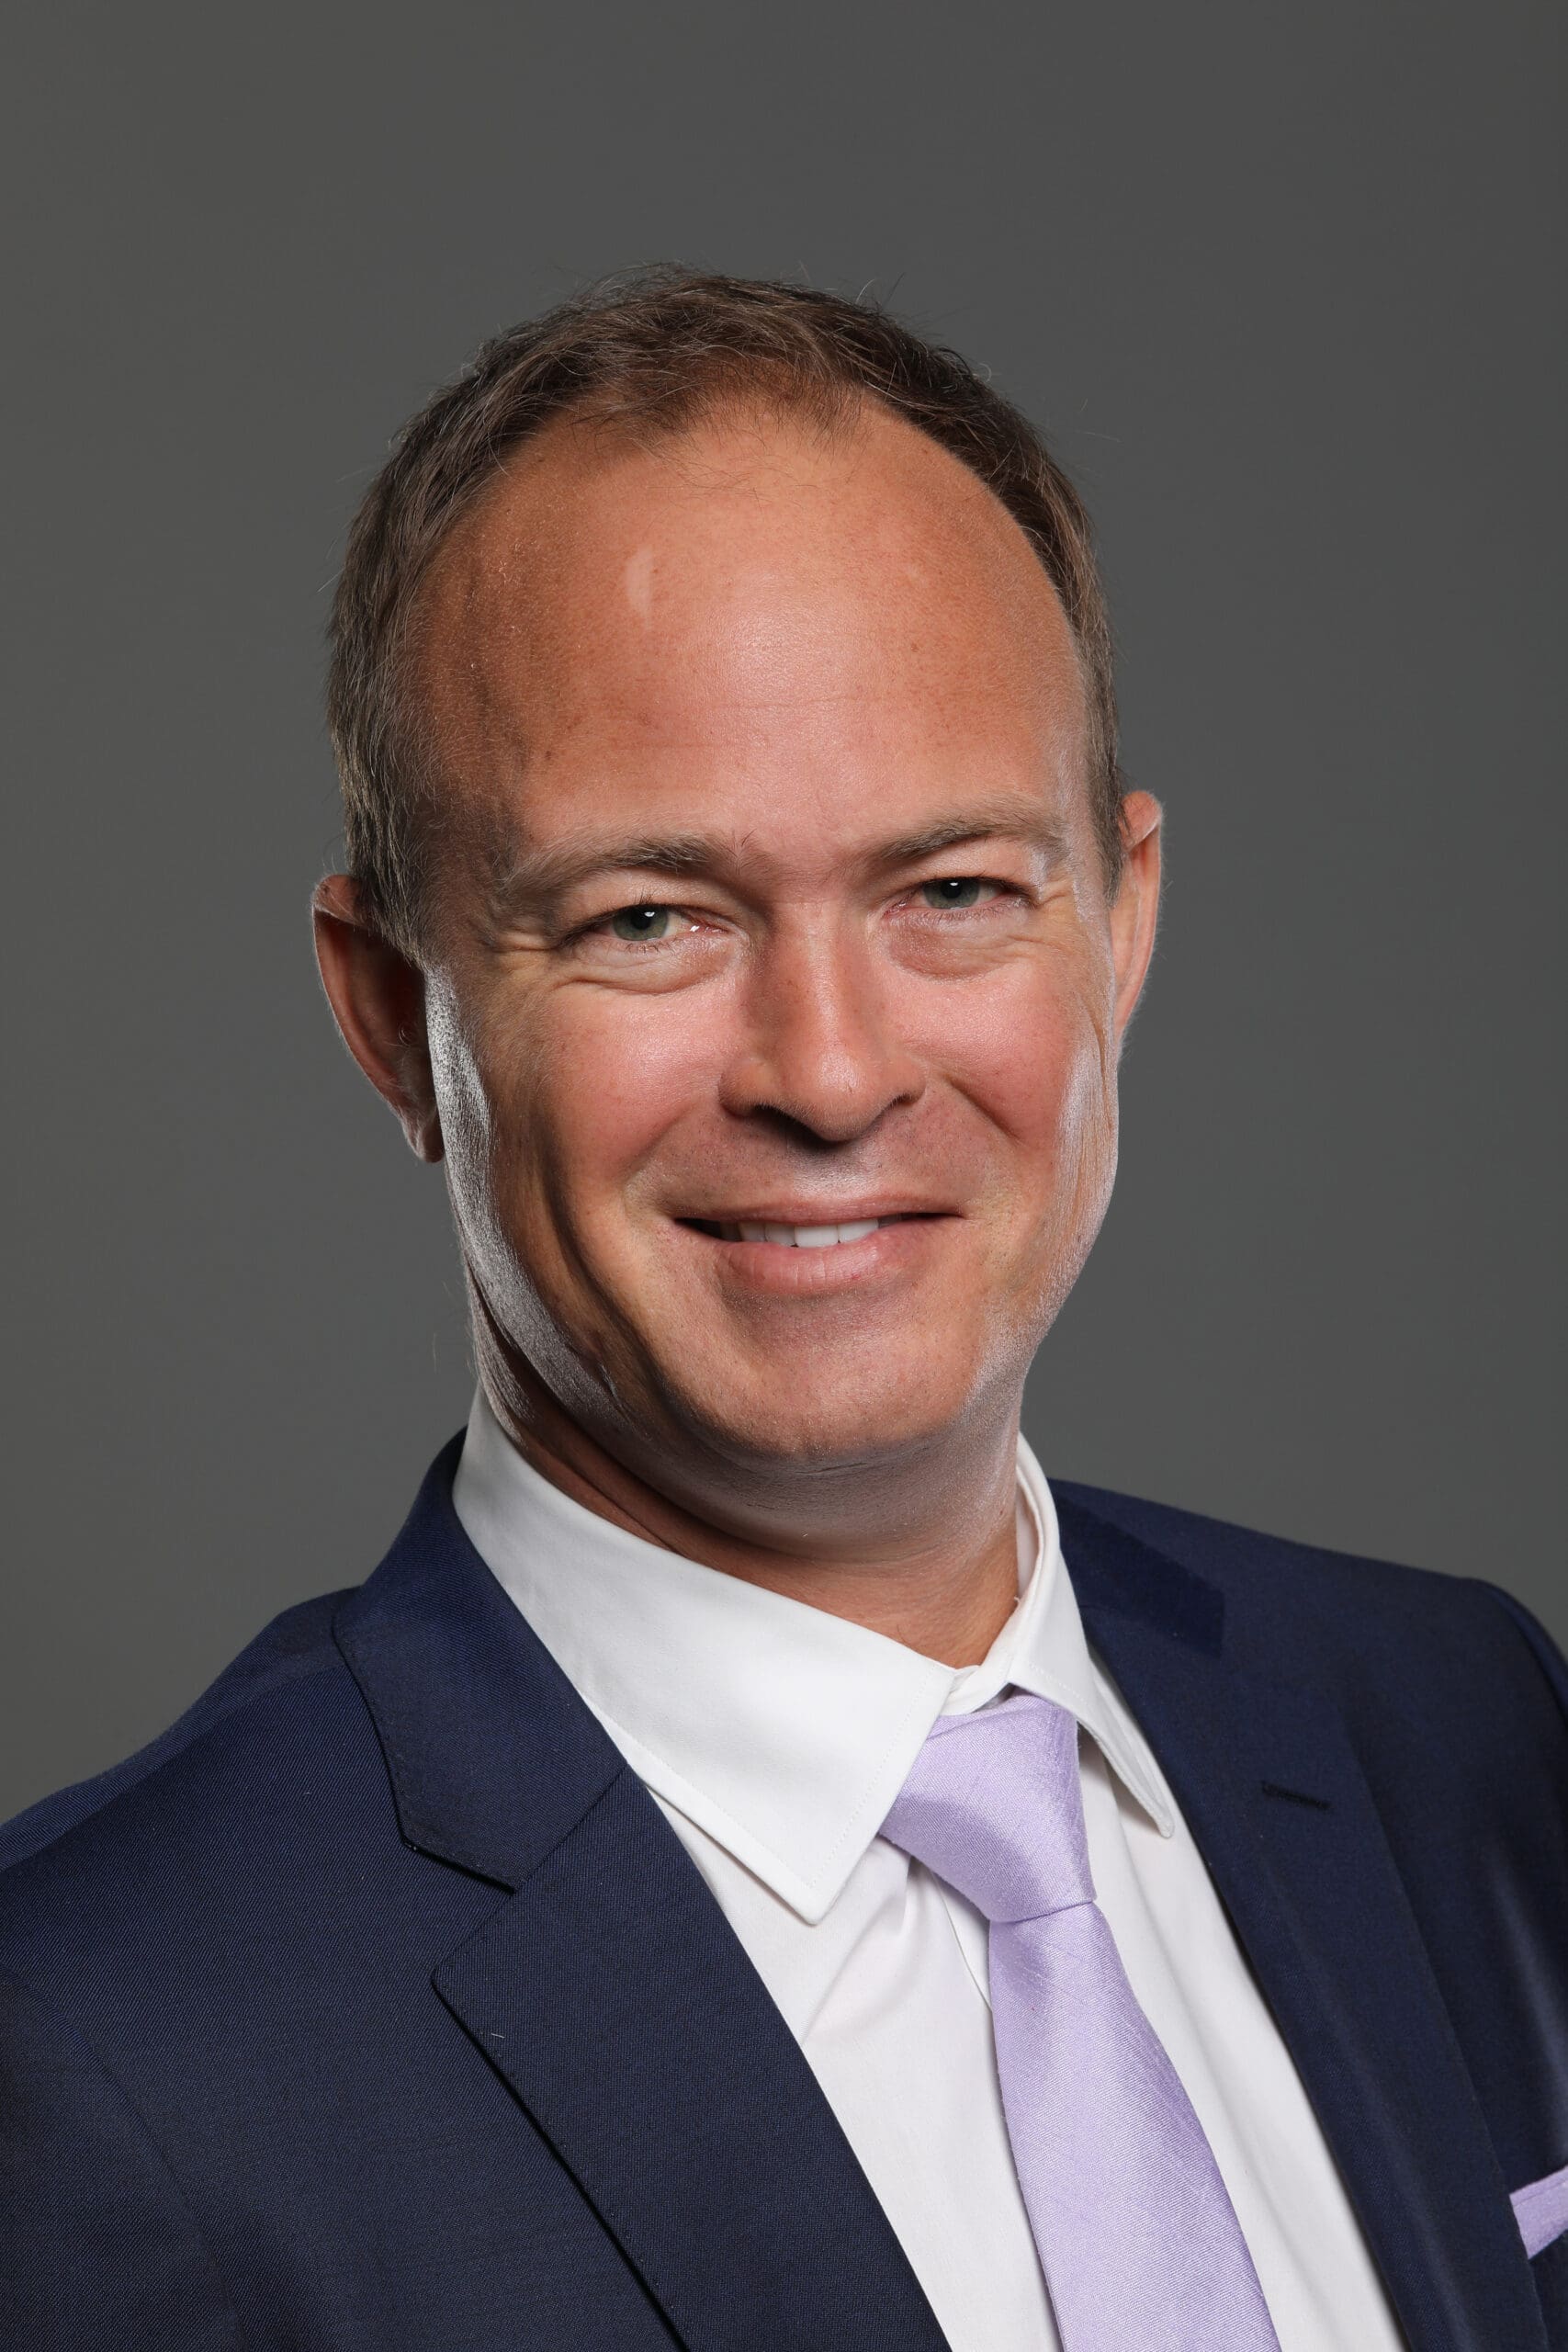 Ernst Fonternel, Chief Consumer Officer at MTN South Africa